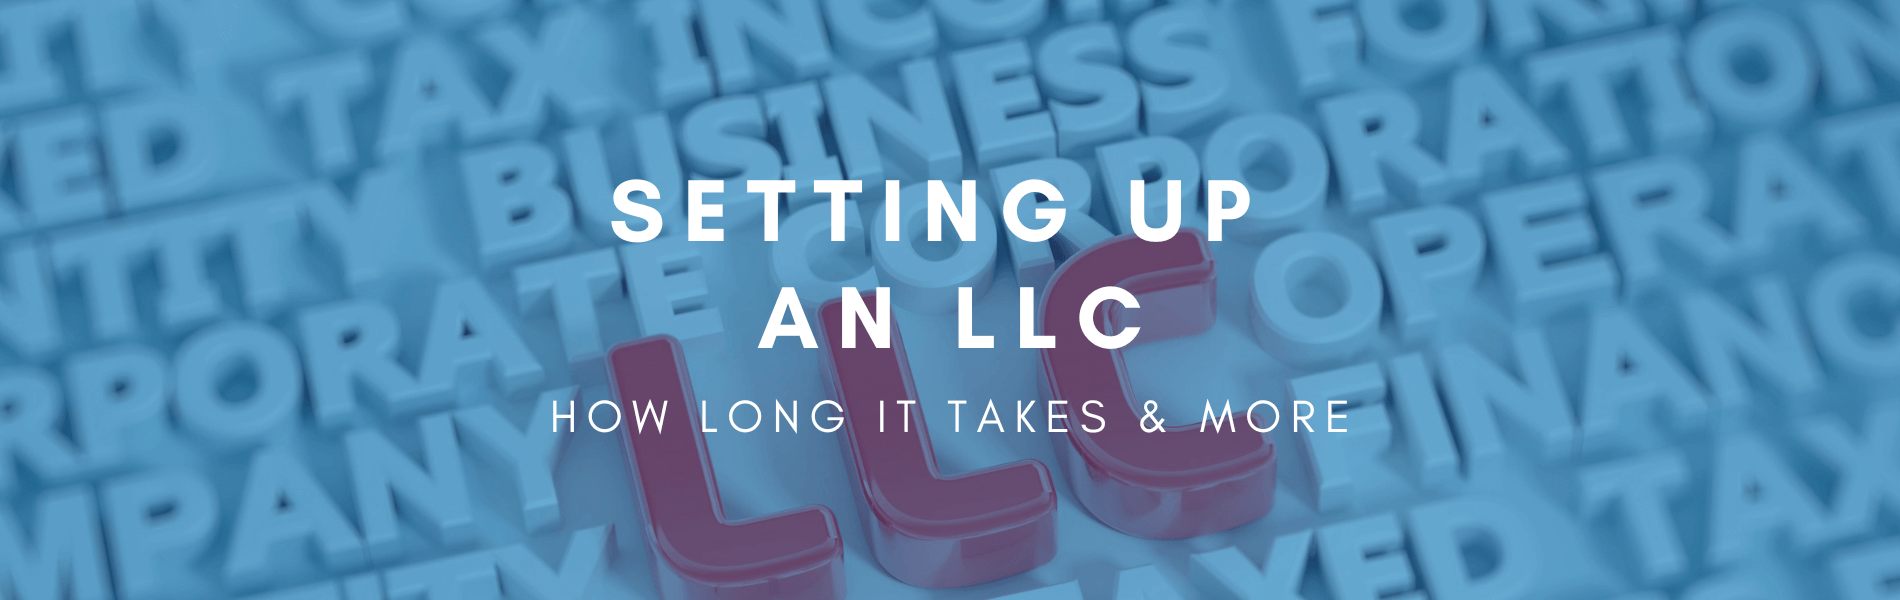 how long does it take to set up an llc